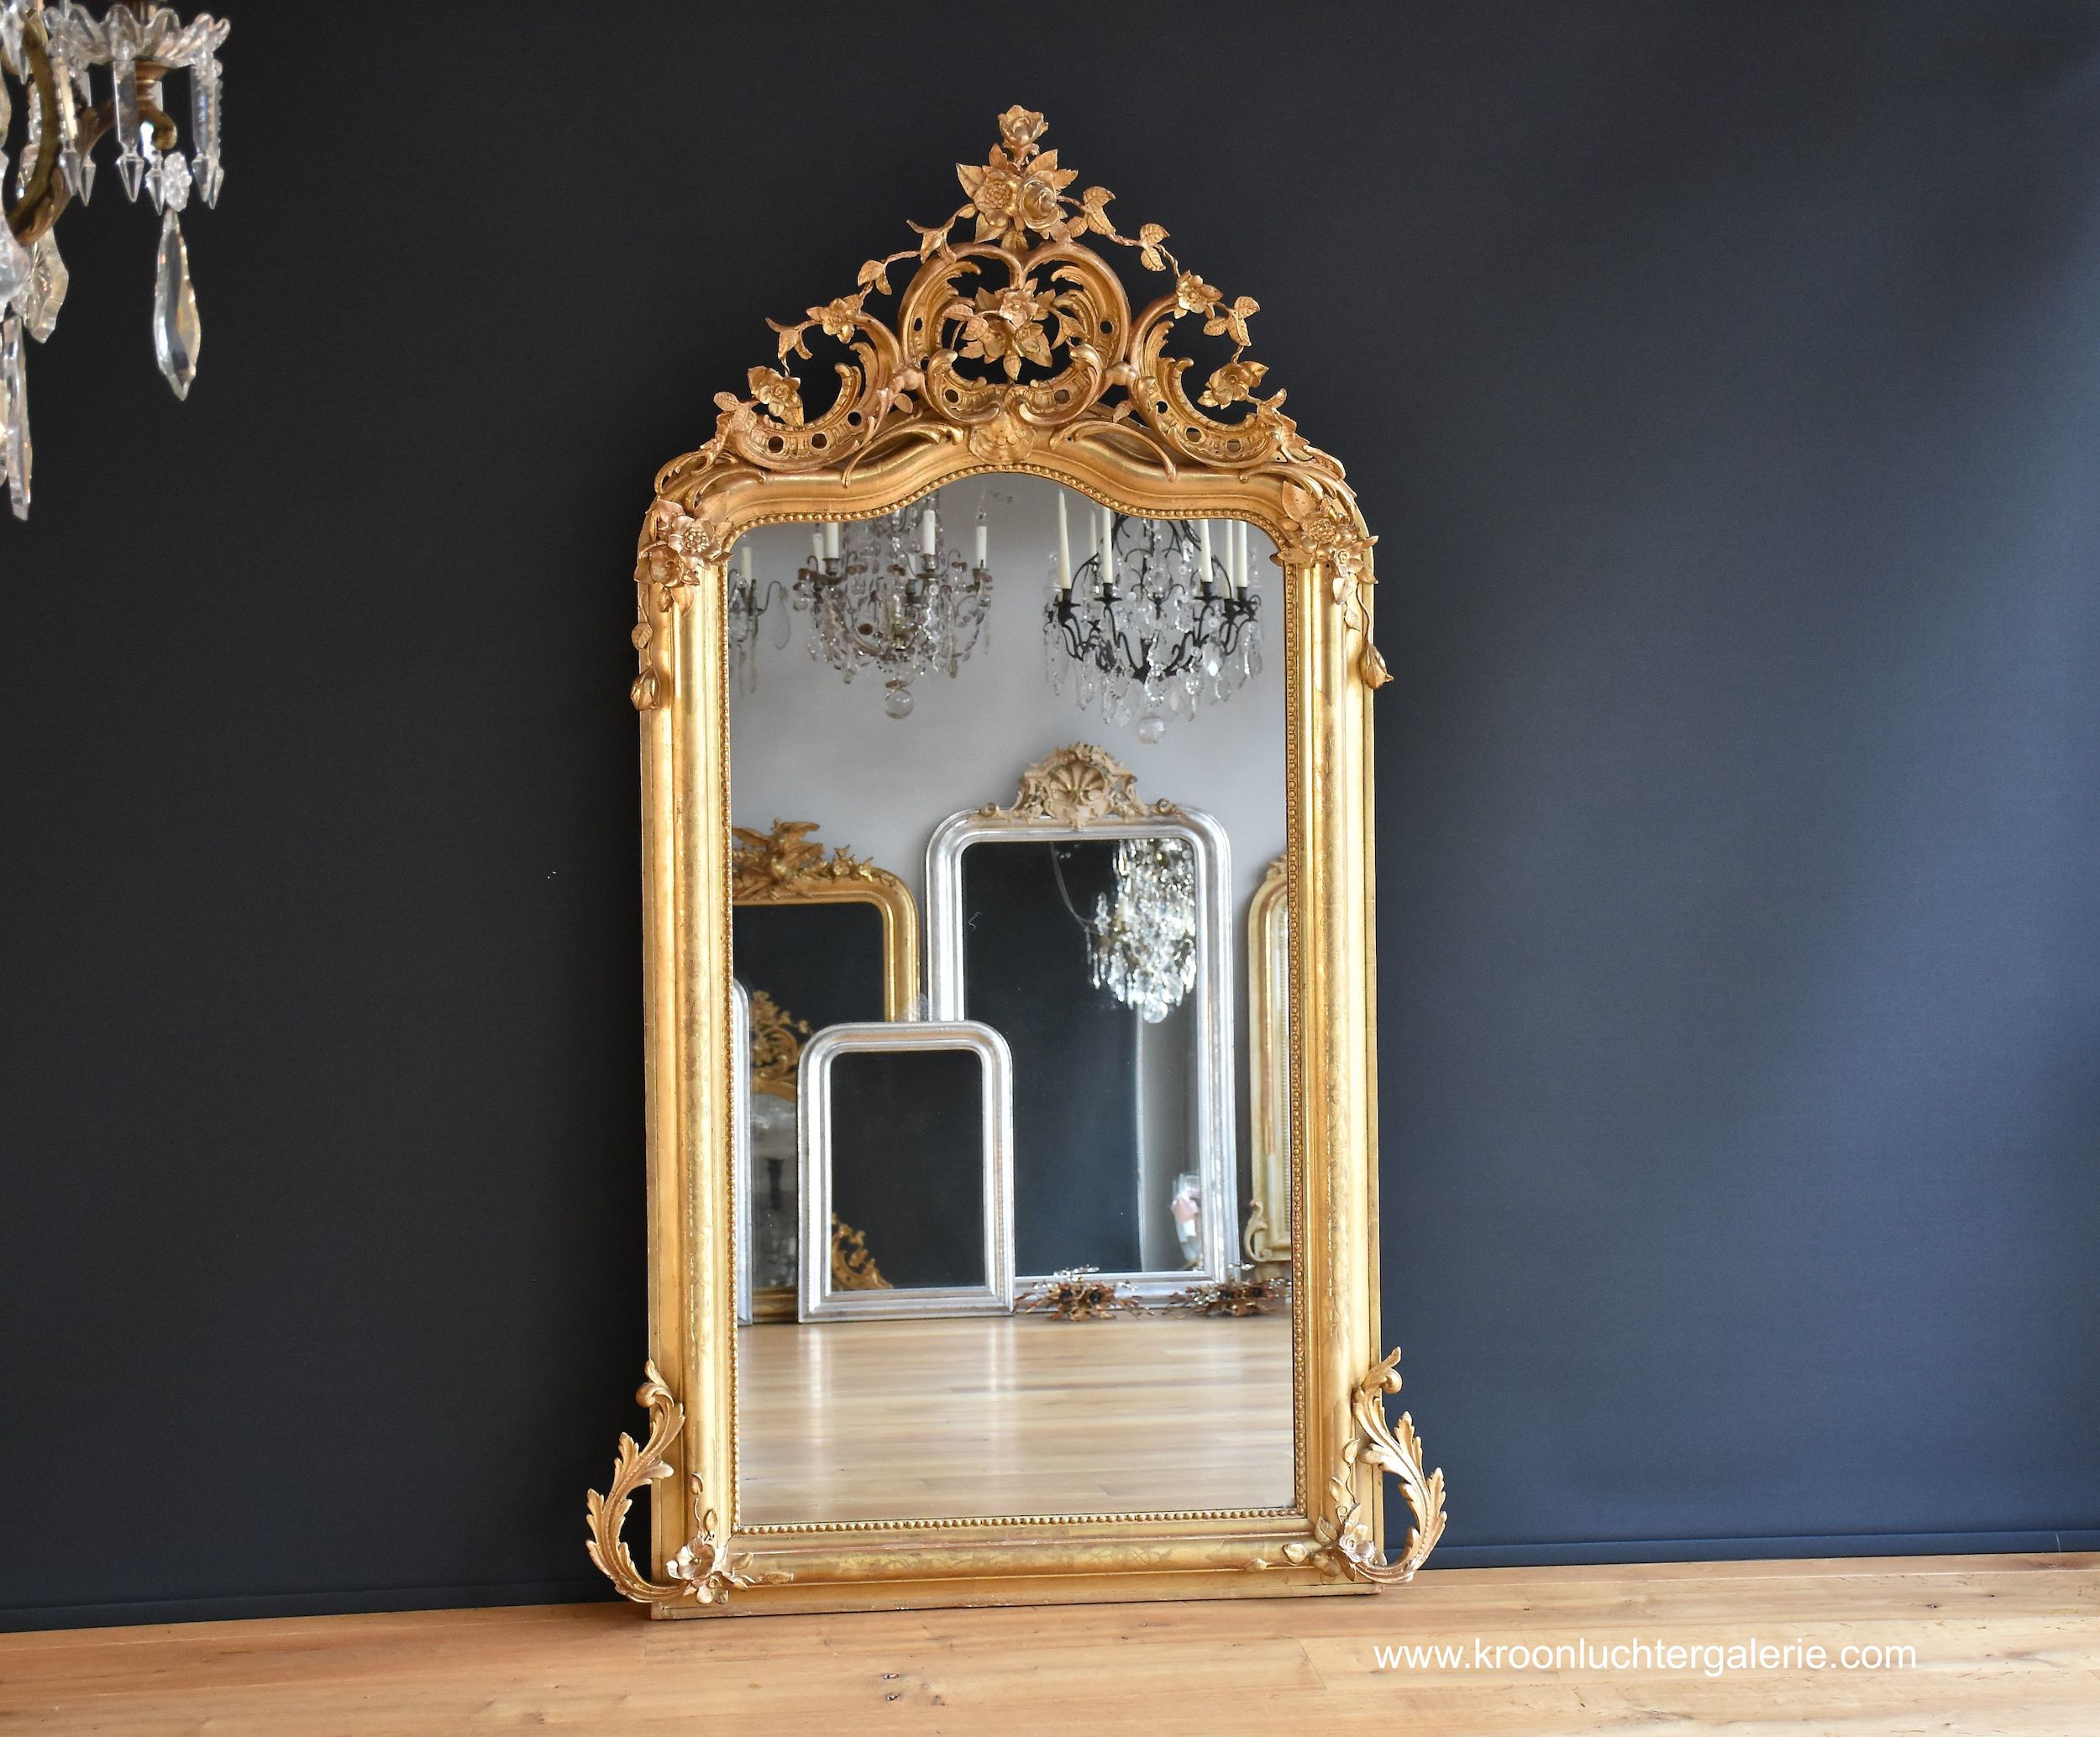 Large antique French mirror with a gorgeous crown